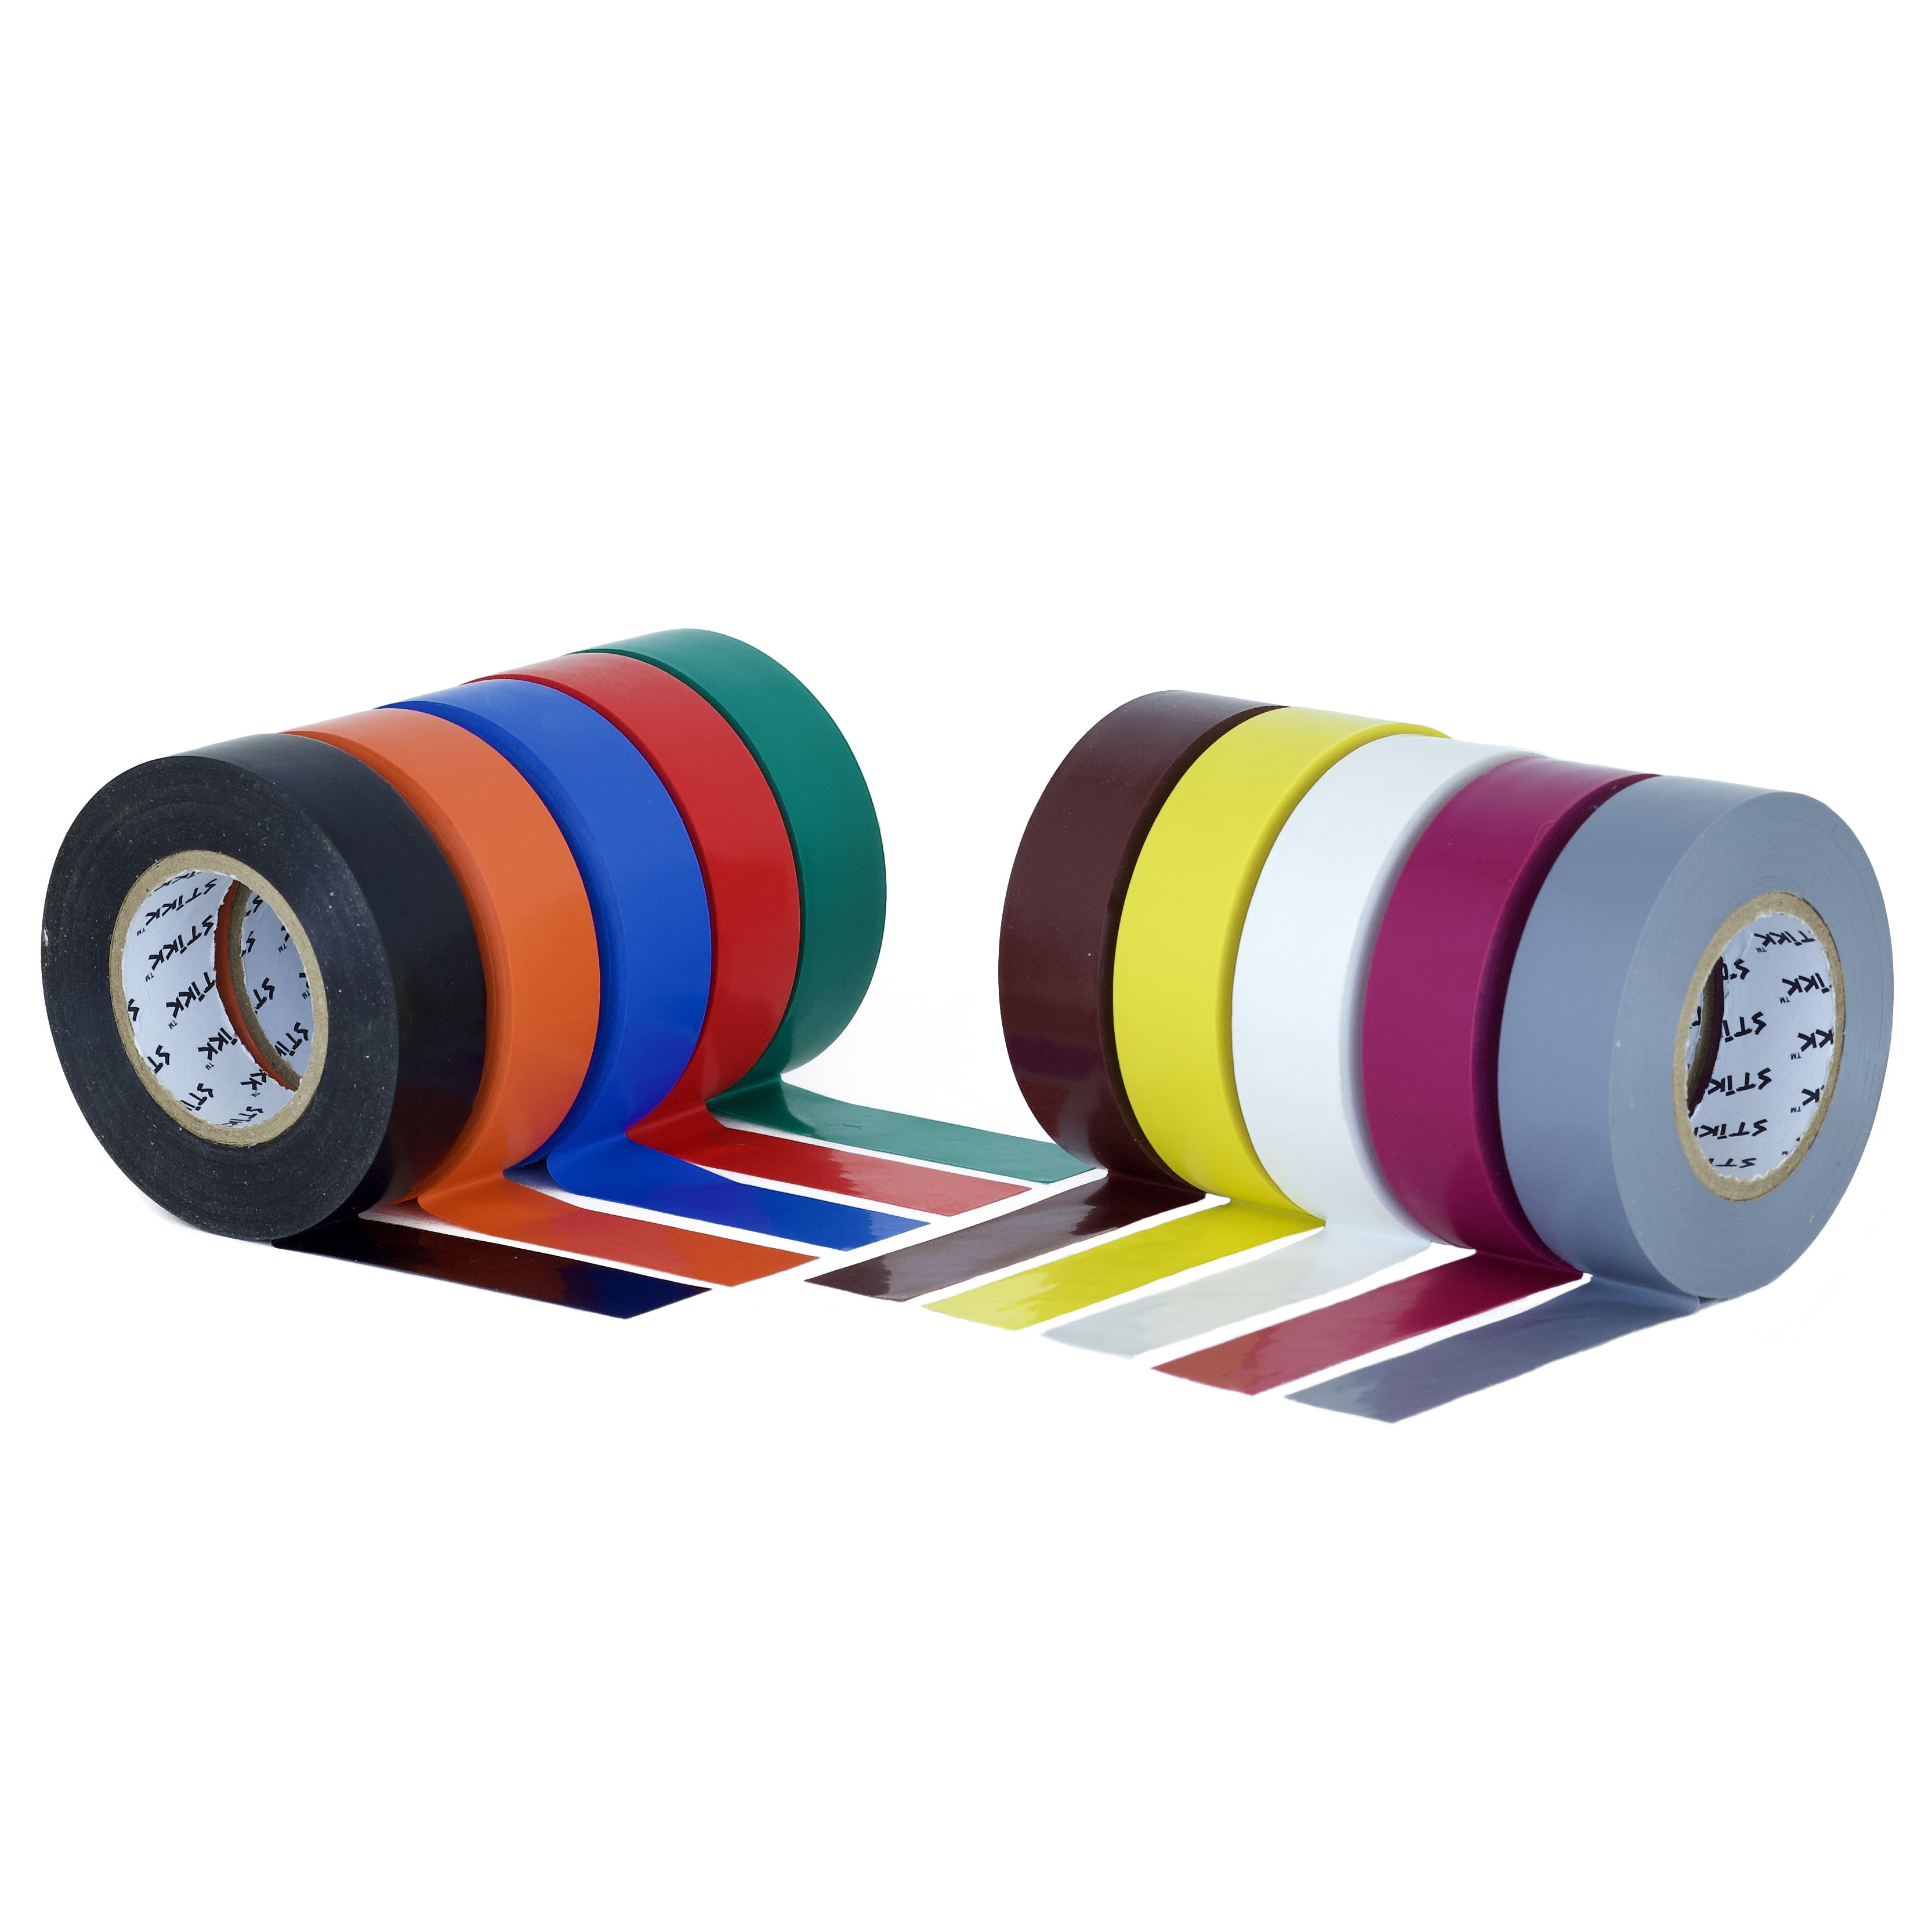 STIKK Multi Colored Electrical Tape (10 Pack) 3/4 Wide 66 Feet 20 Meters  Long (Black, Orange, Blue, Red, Green, Brown, Yellow, White, Purple, and